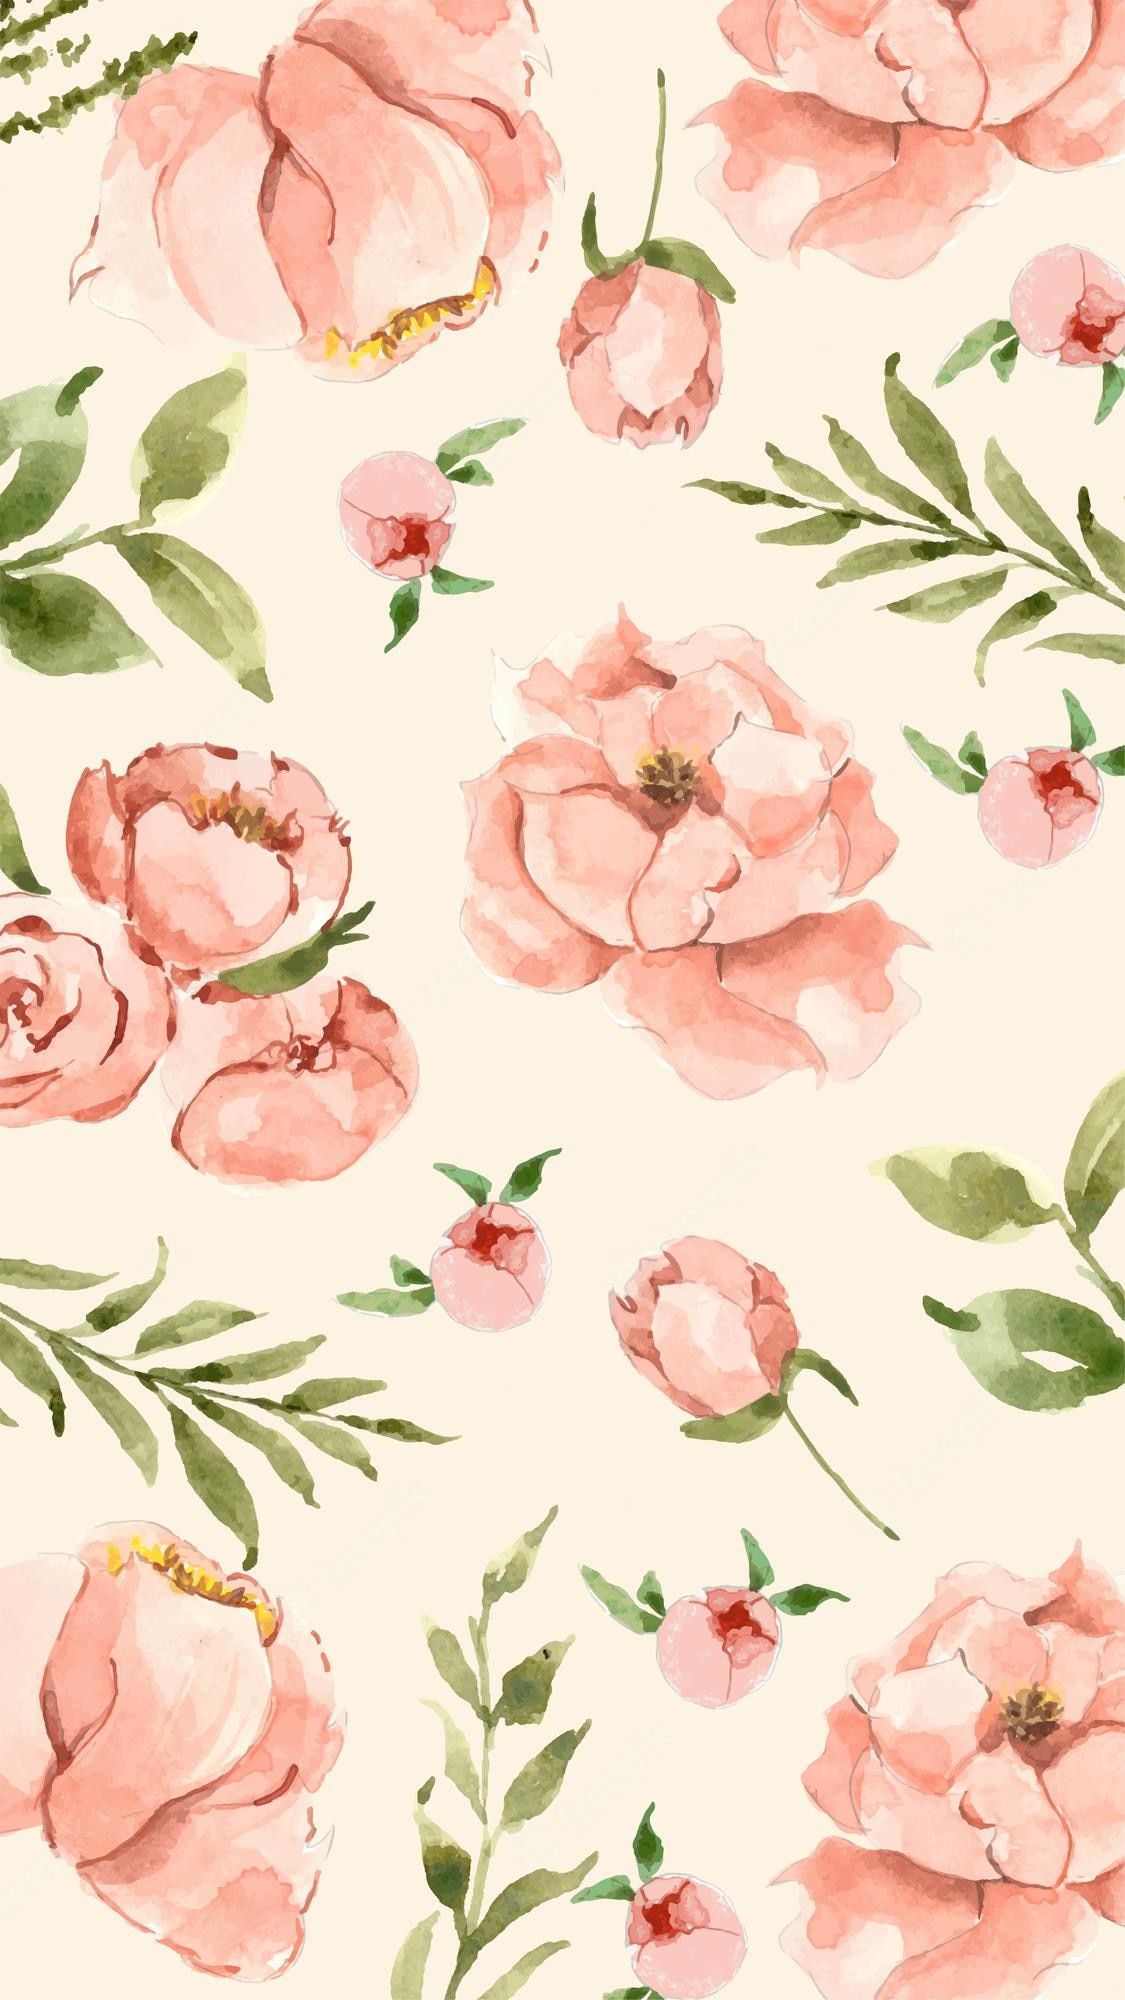 A beautiful watercolor floral wallpaper for your phone - Soft pink